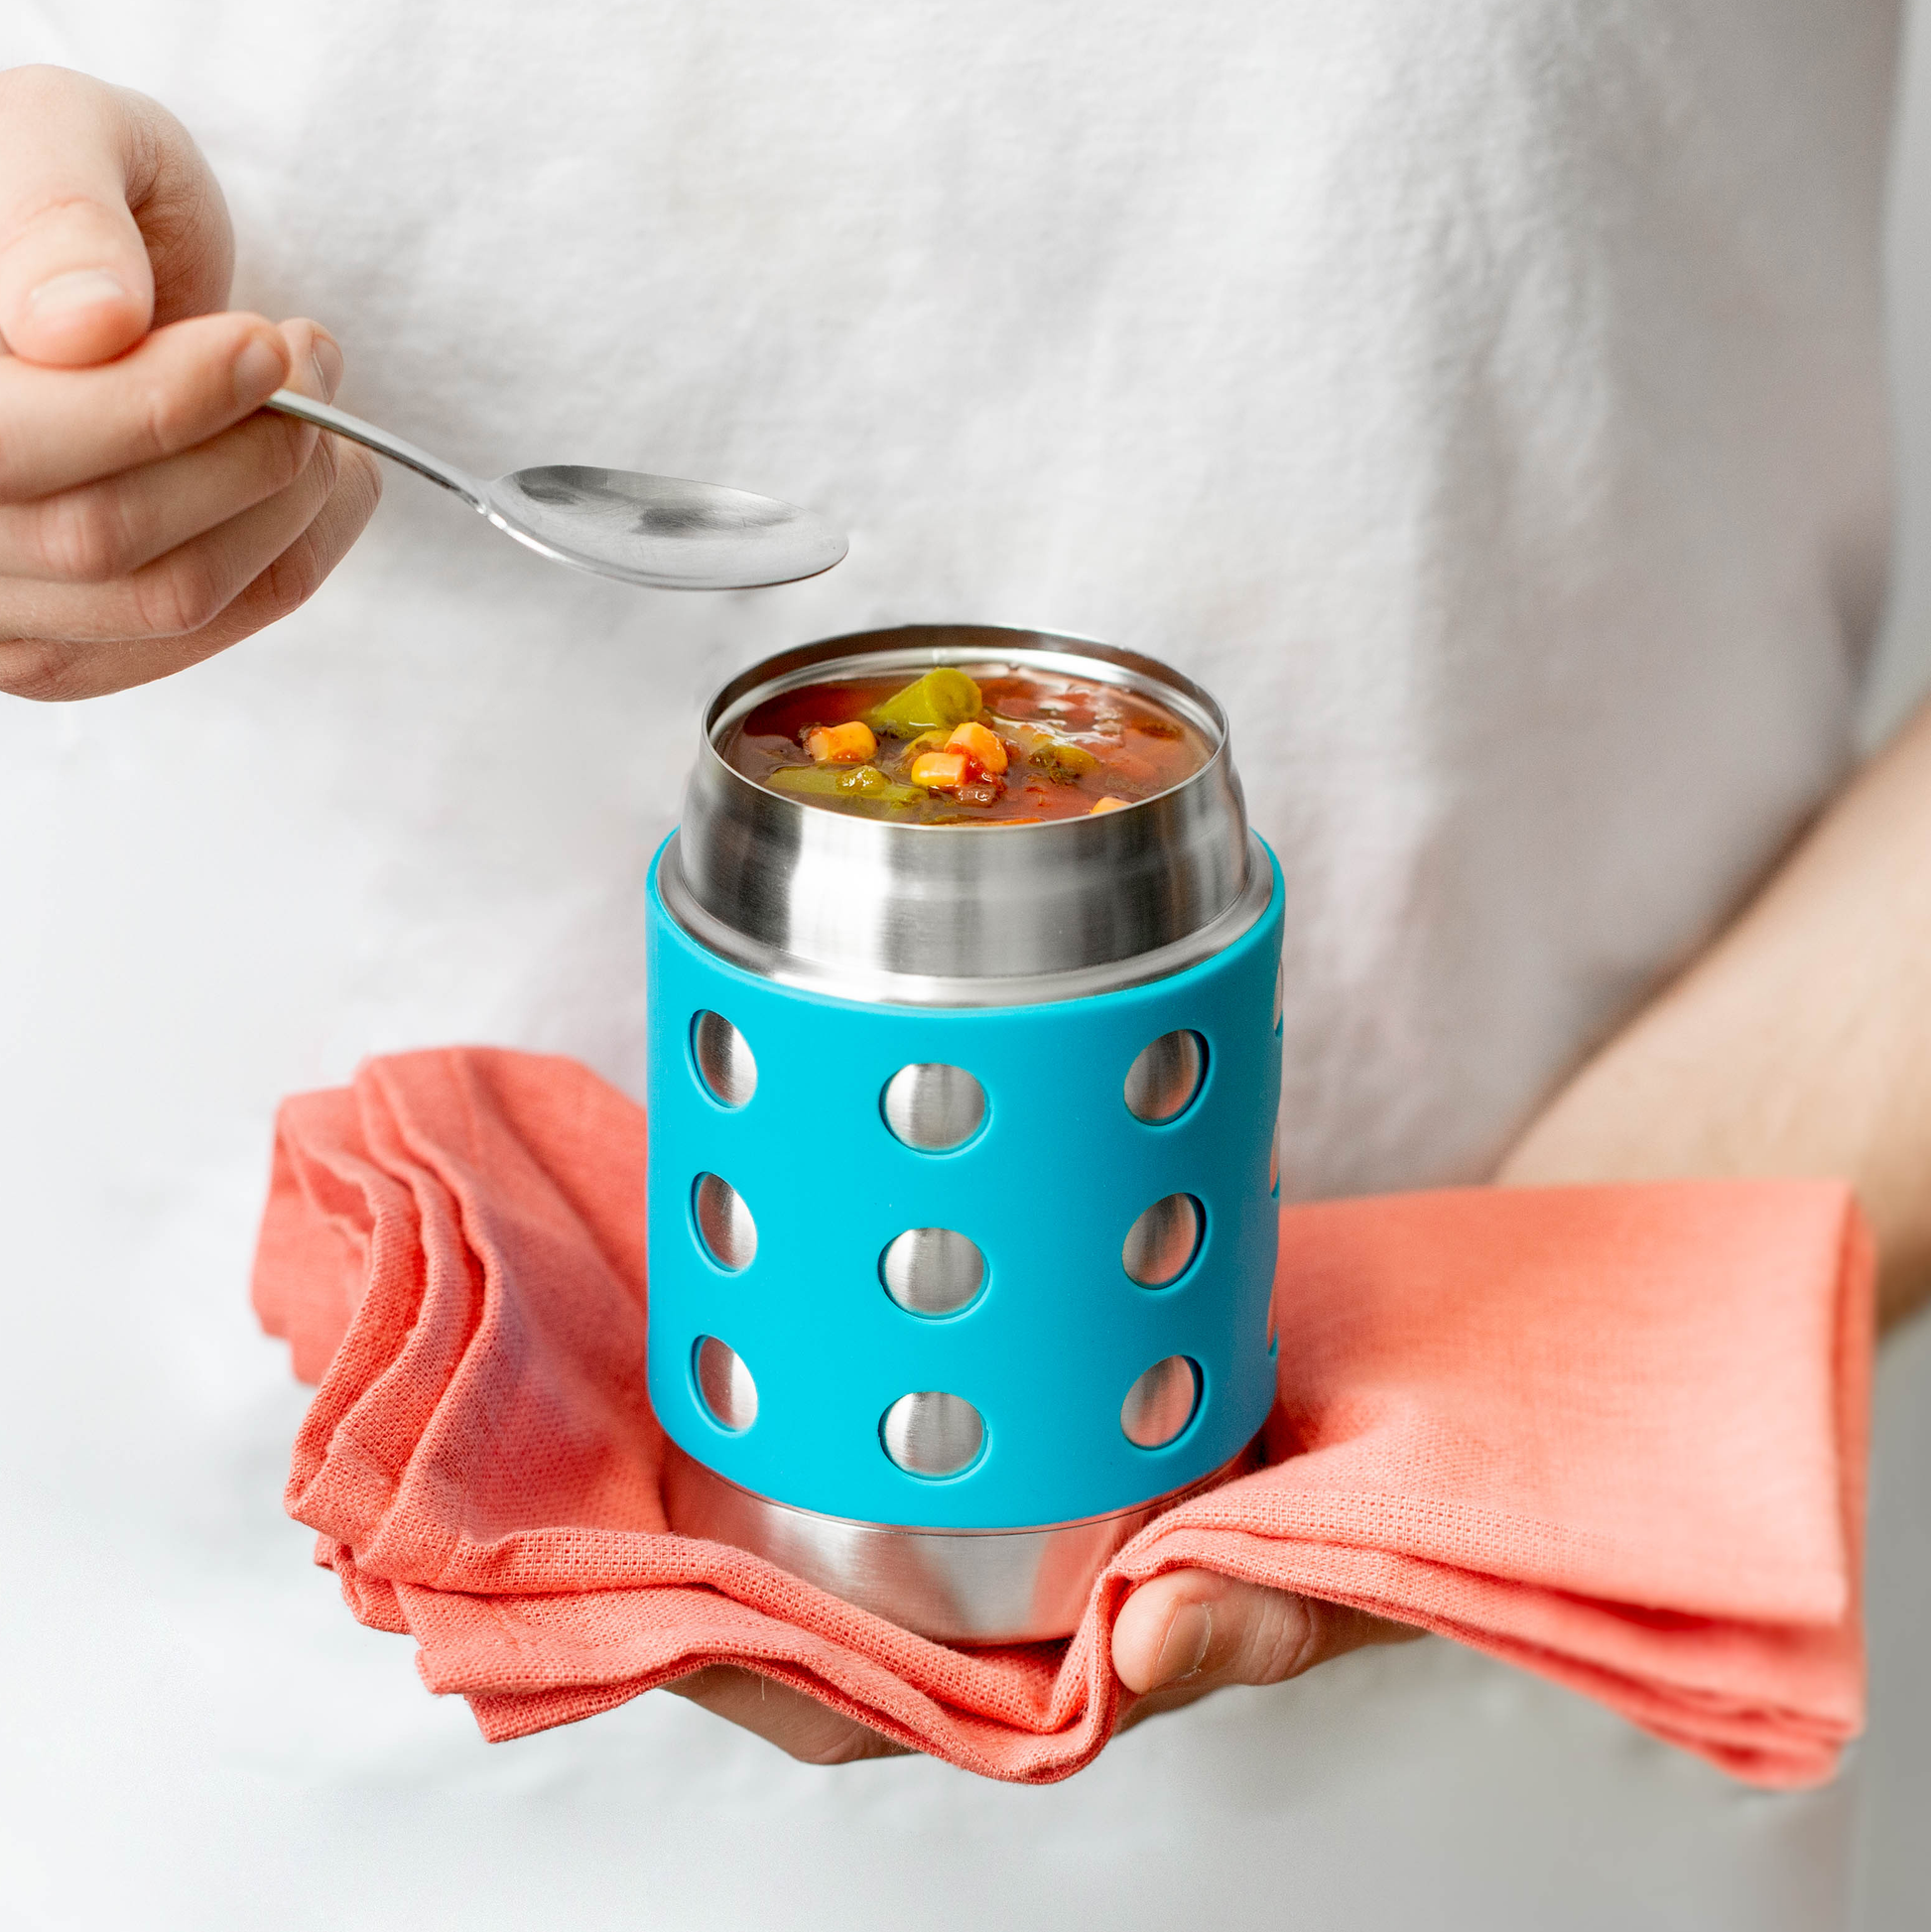  LunchBots Thermal 8 oz Triple Insulated Thermos - Hot 6 Hours  or Cold 12 Hours - Leak Proof Thermos Soup Jar - All Stainless Interior -  Navy Lid - Aqua Dots : Home & Kitchen